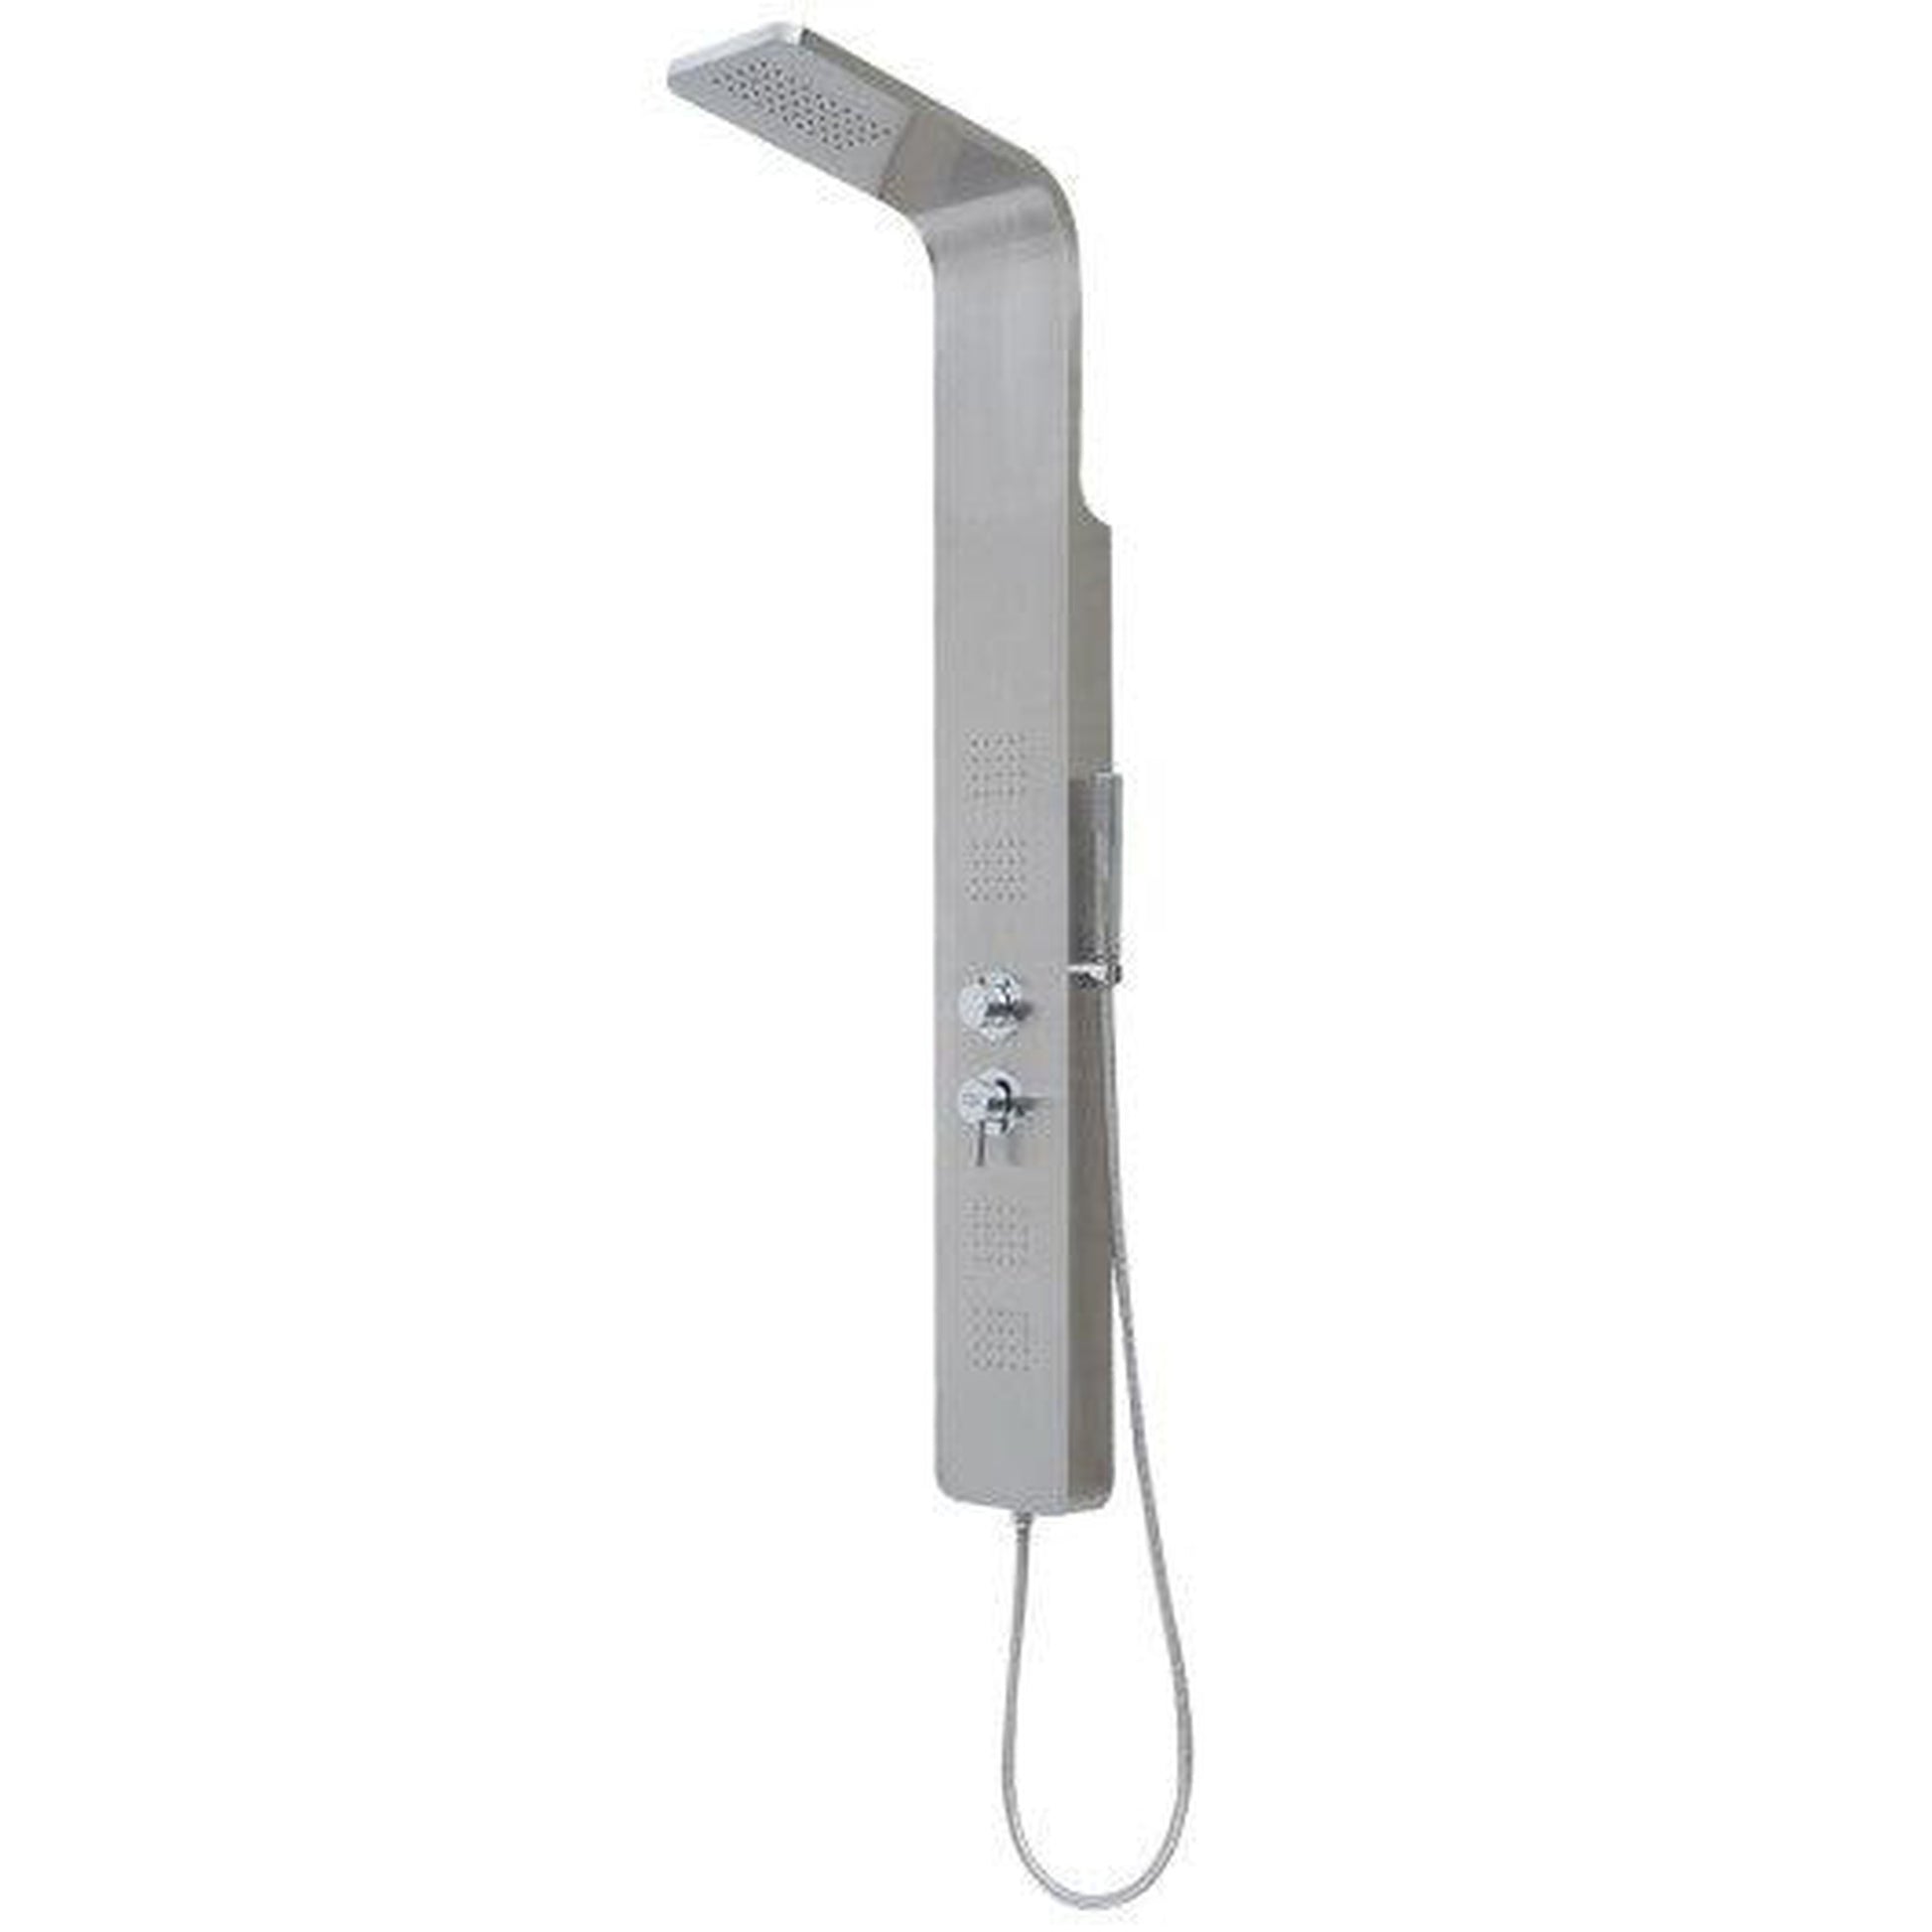 Costway 57" Stainless Steel Rainfall Shower Panel